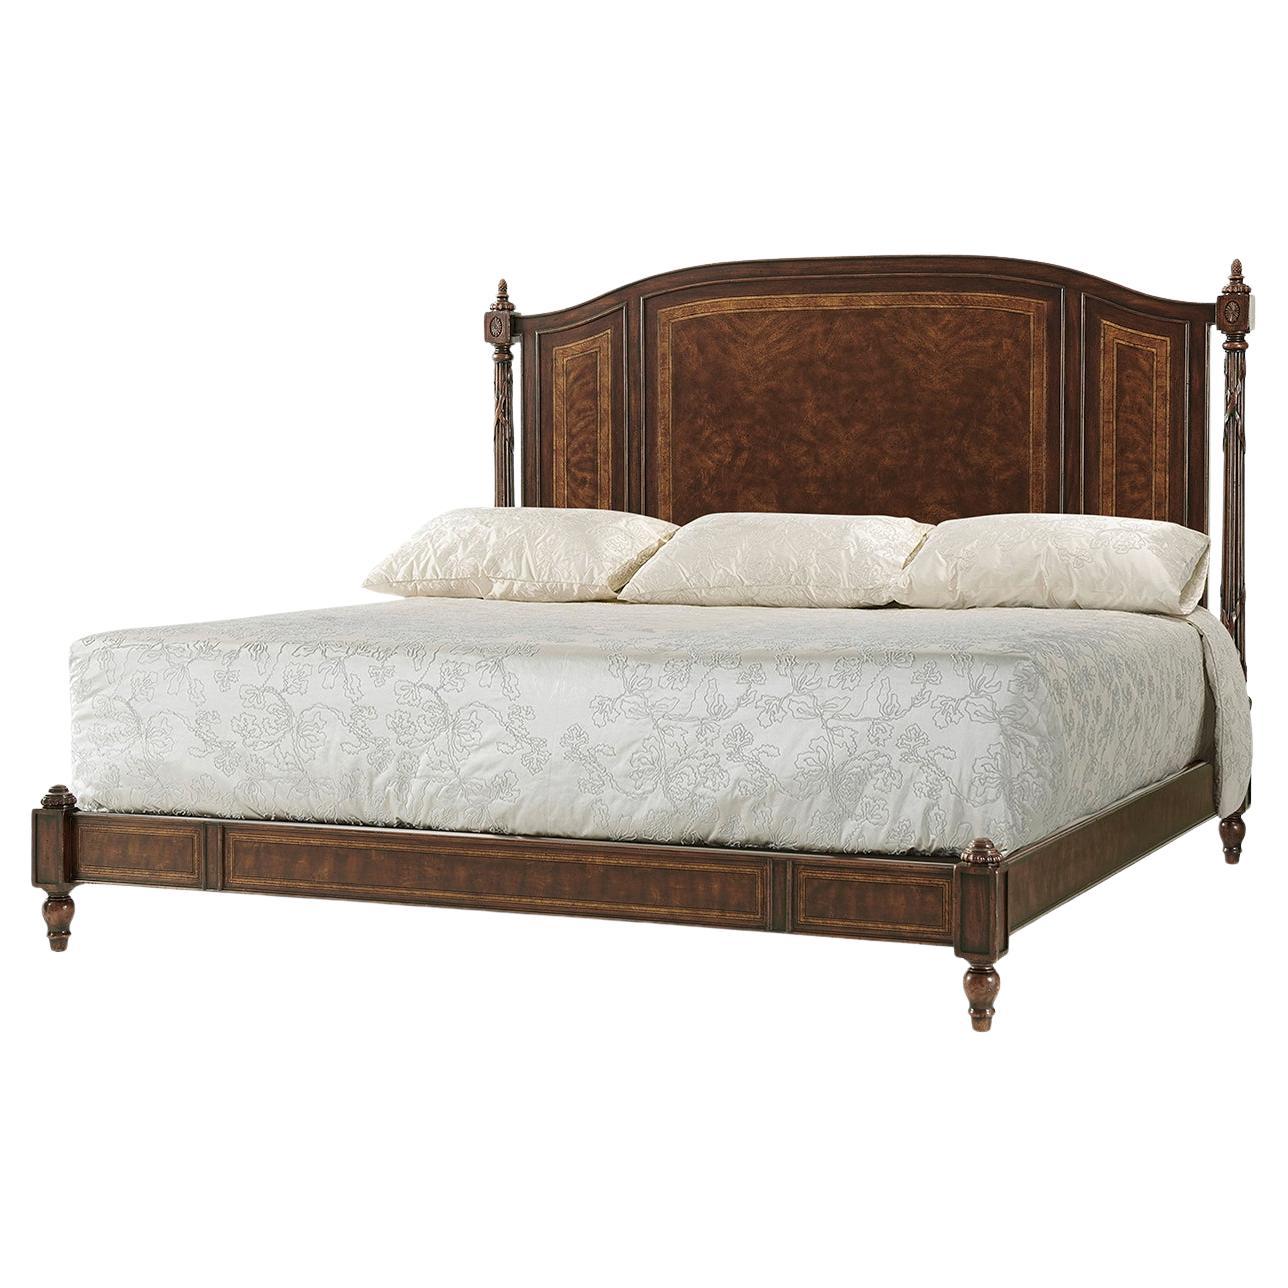 Classical Polished King Size Bed